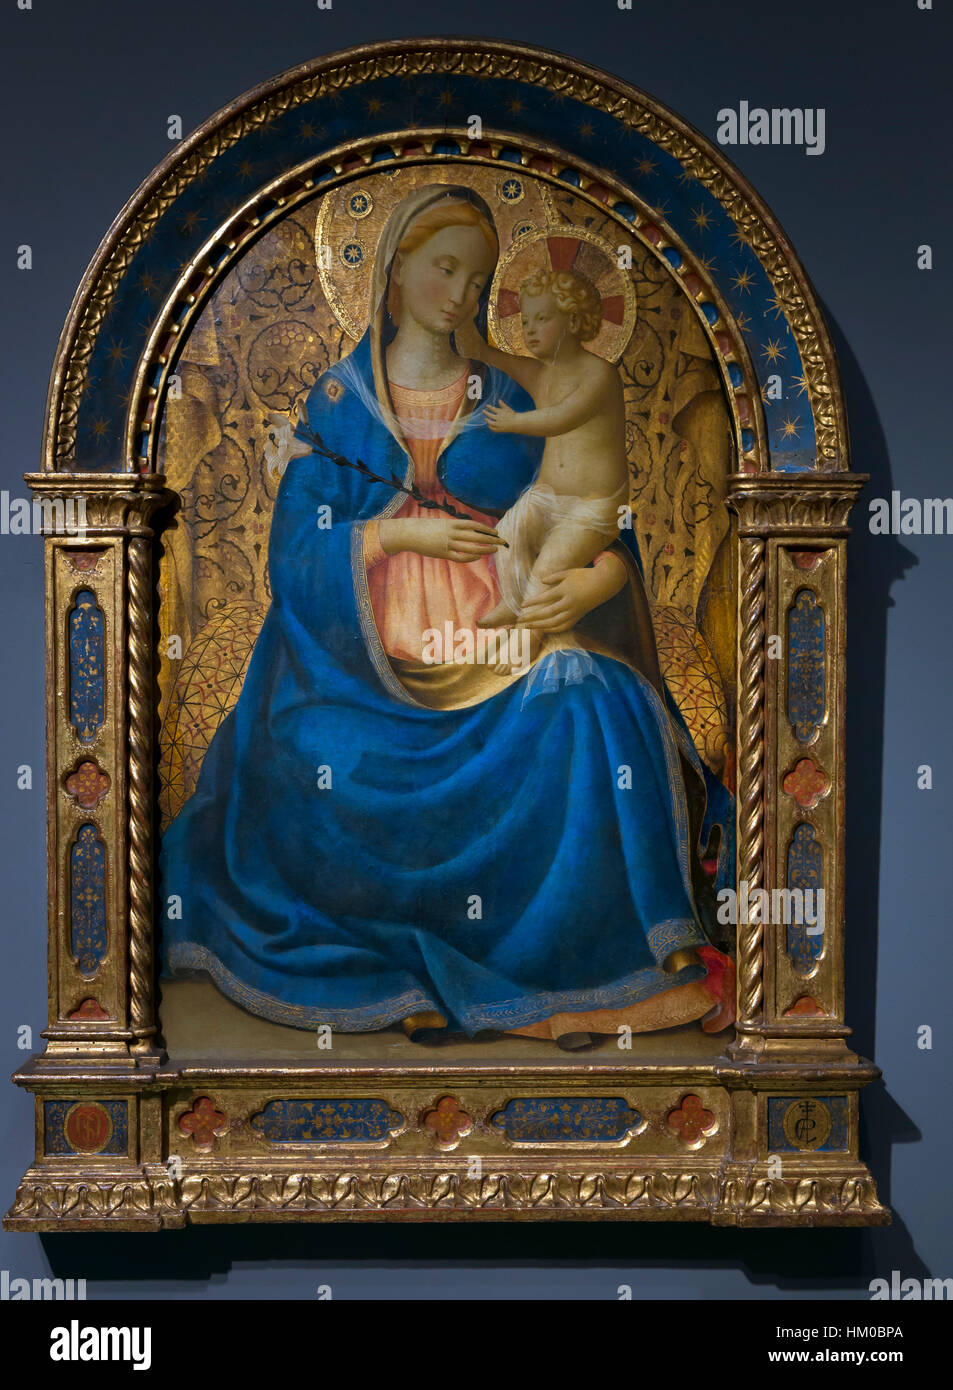 Madonna of Humility, by Fra Angelico, circa 1440, tempera on panel, Rijksmuseum, Amsterdam, Netherlands, Europe, Stock Photo